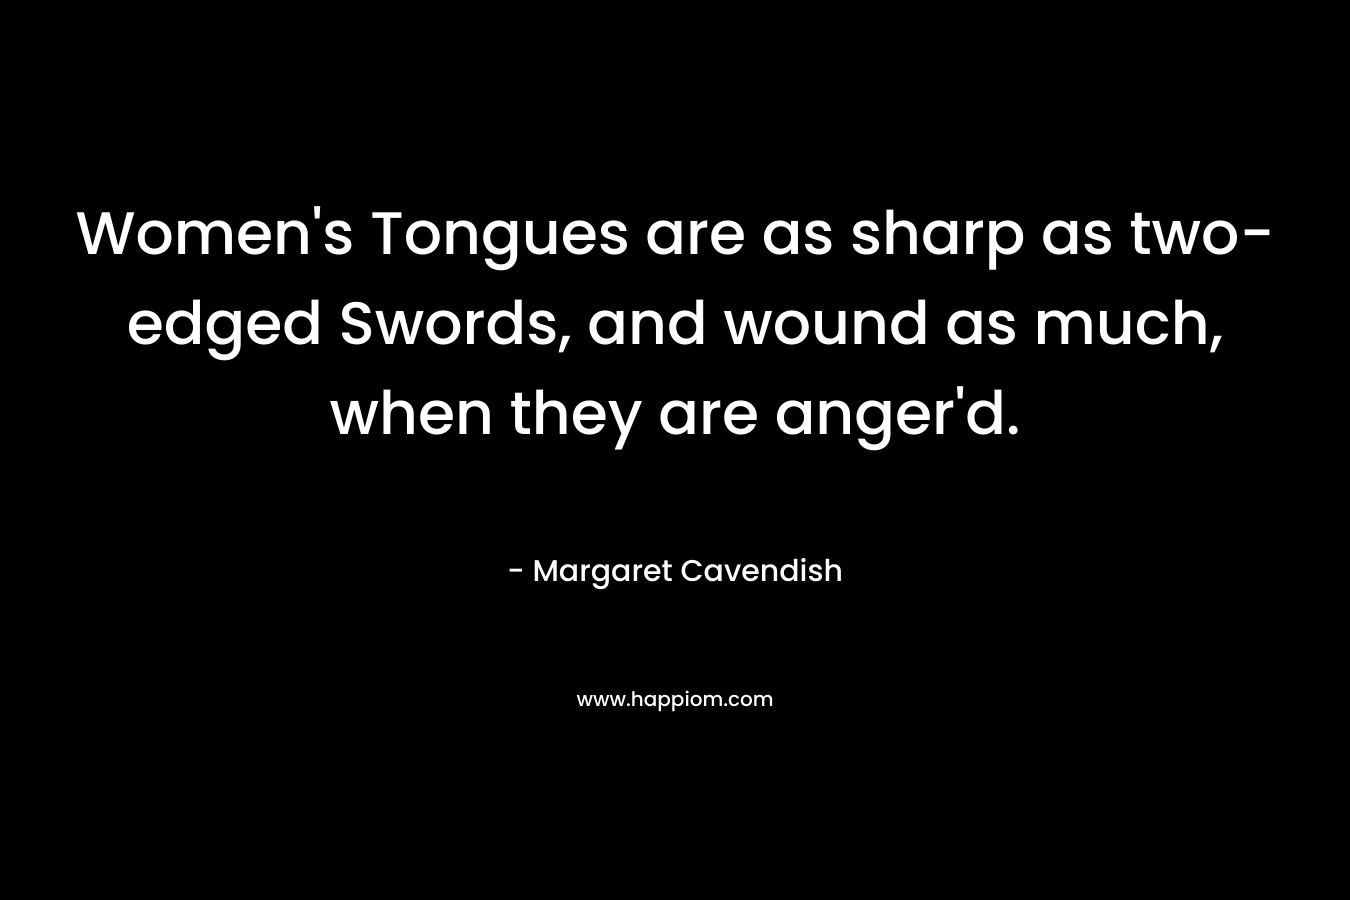 Women’s Tongues are as sharp as two-edged Swords, and wound as much, when they are anger’d. – Margaret Cavendish